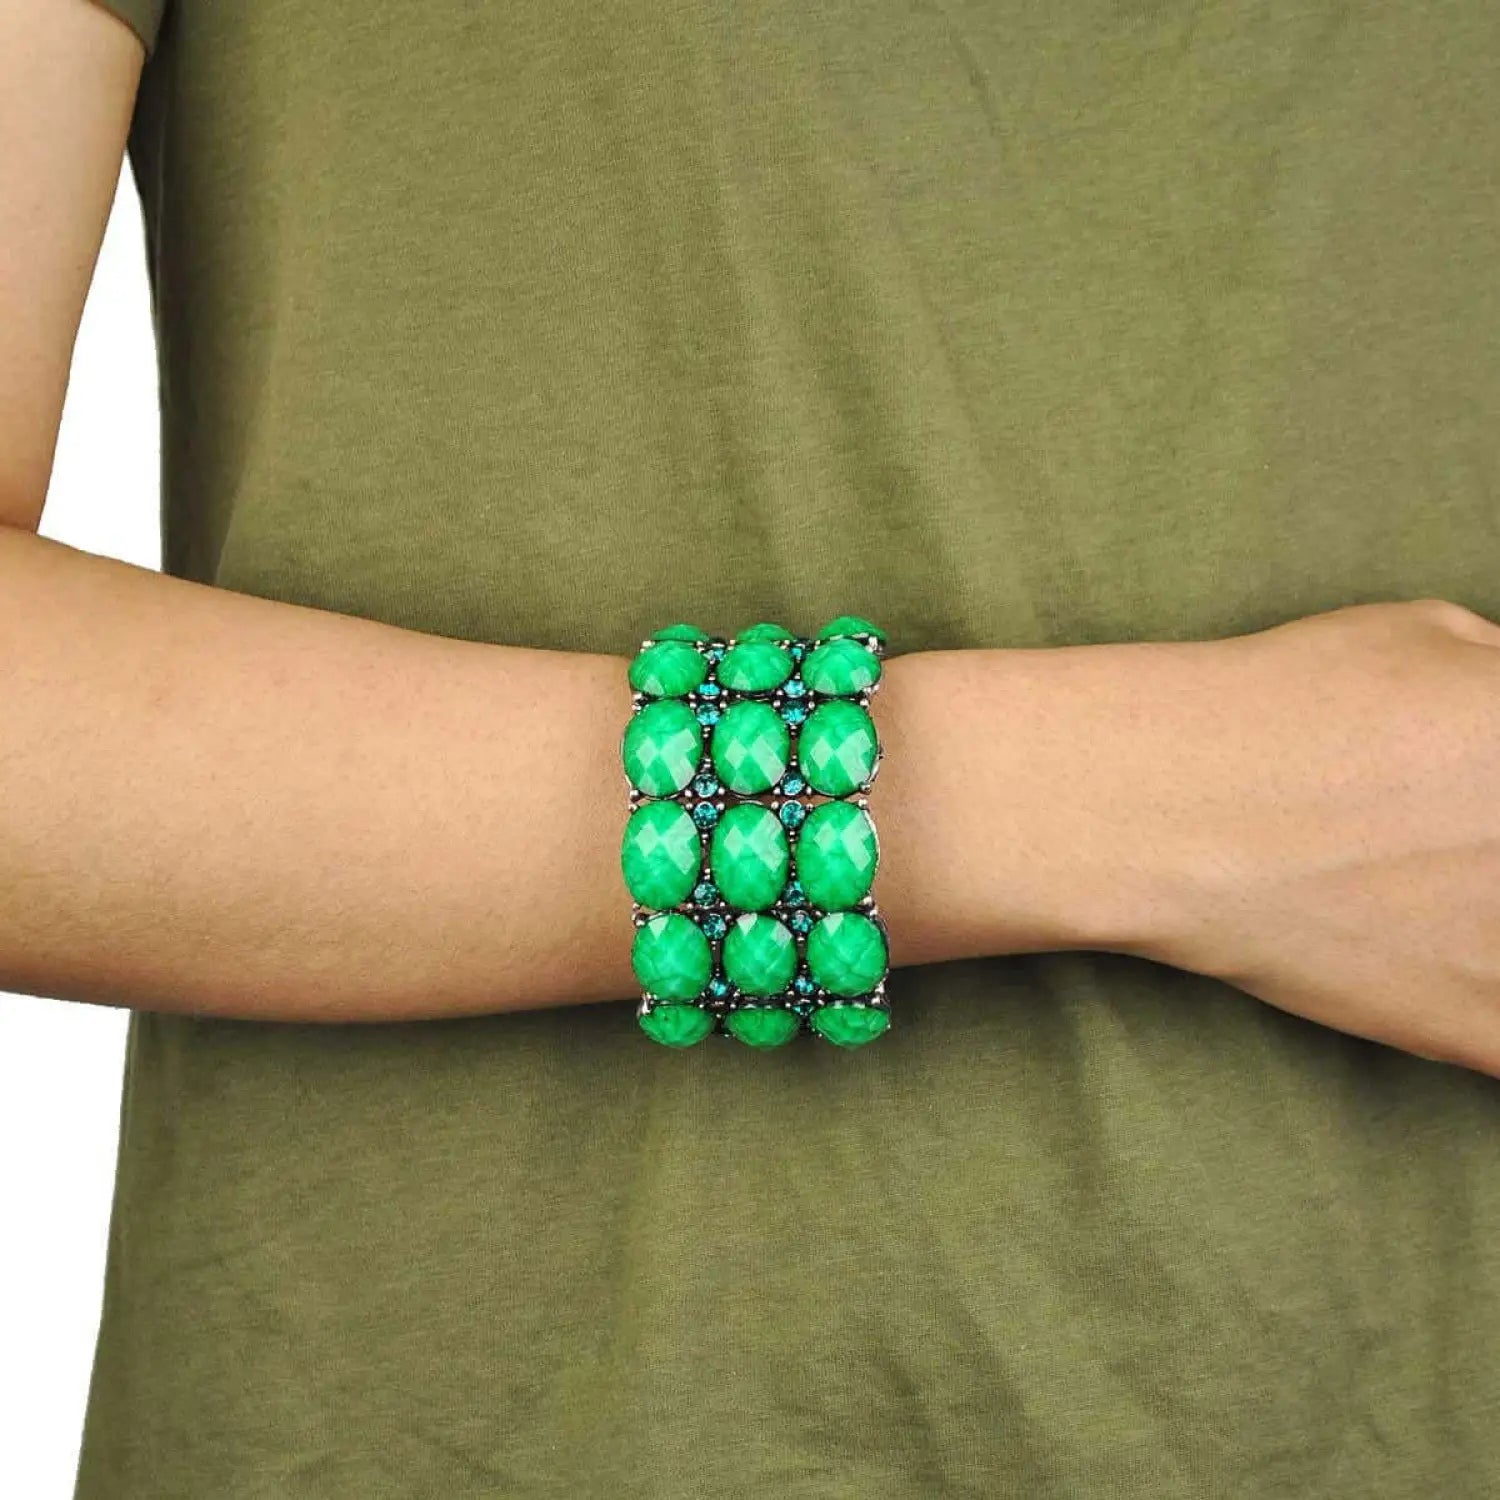 Green crystal statement bracelet with metal beads and chunky vivid metal design.